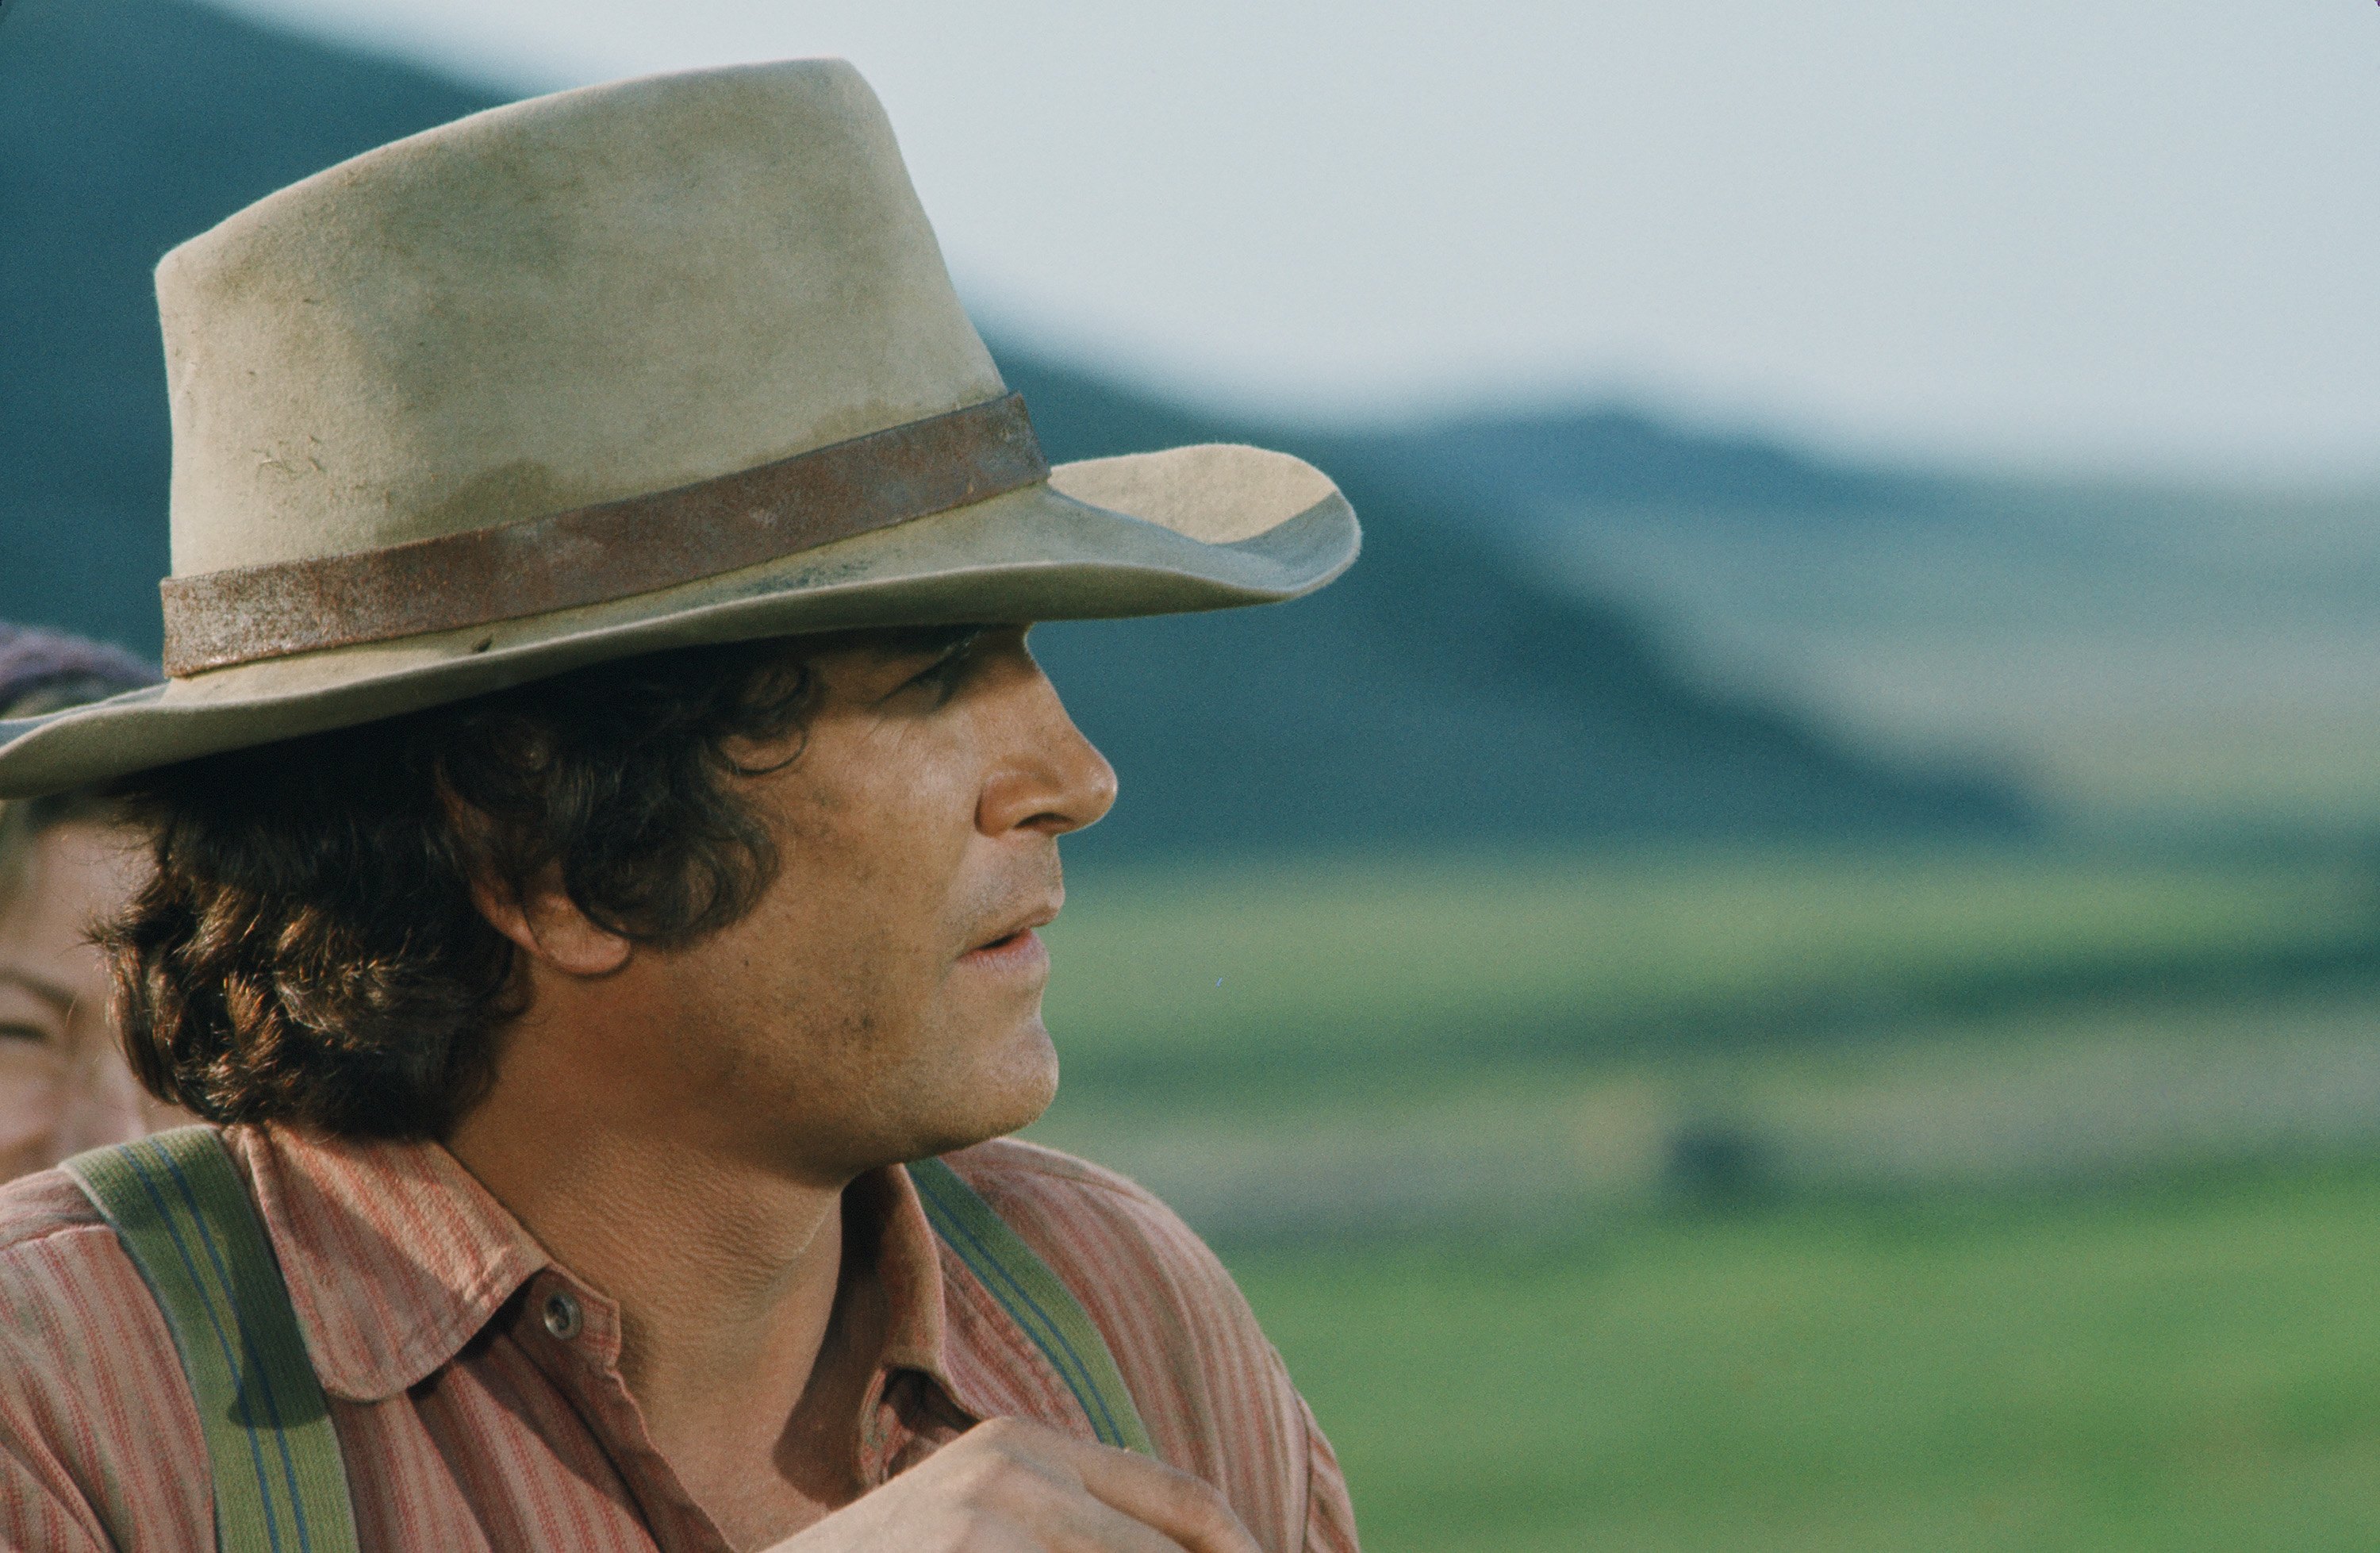 Michael Landon with a tan and brown hat and a red shirt.